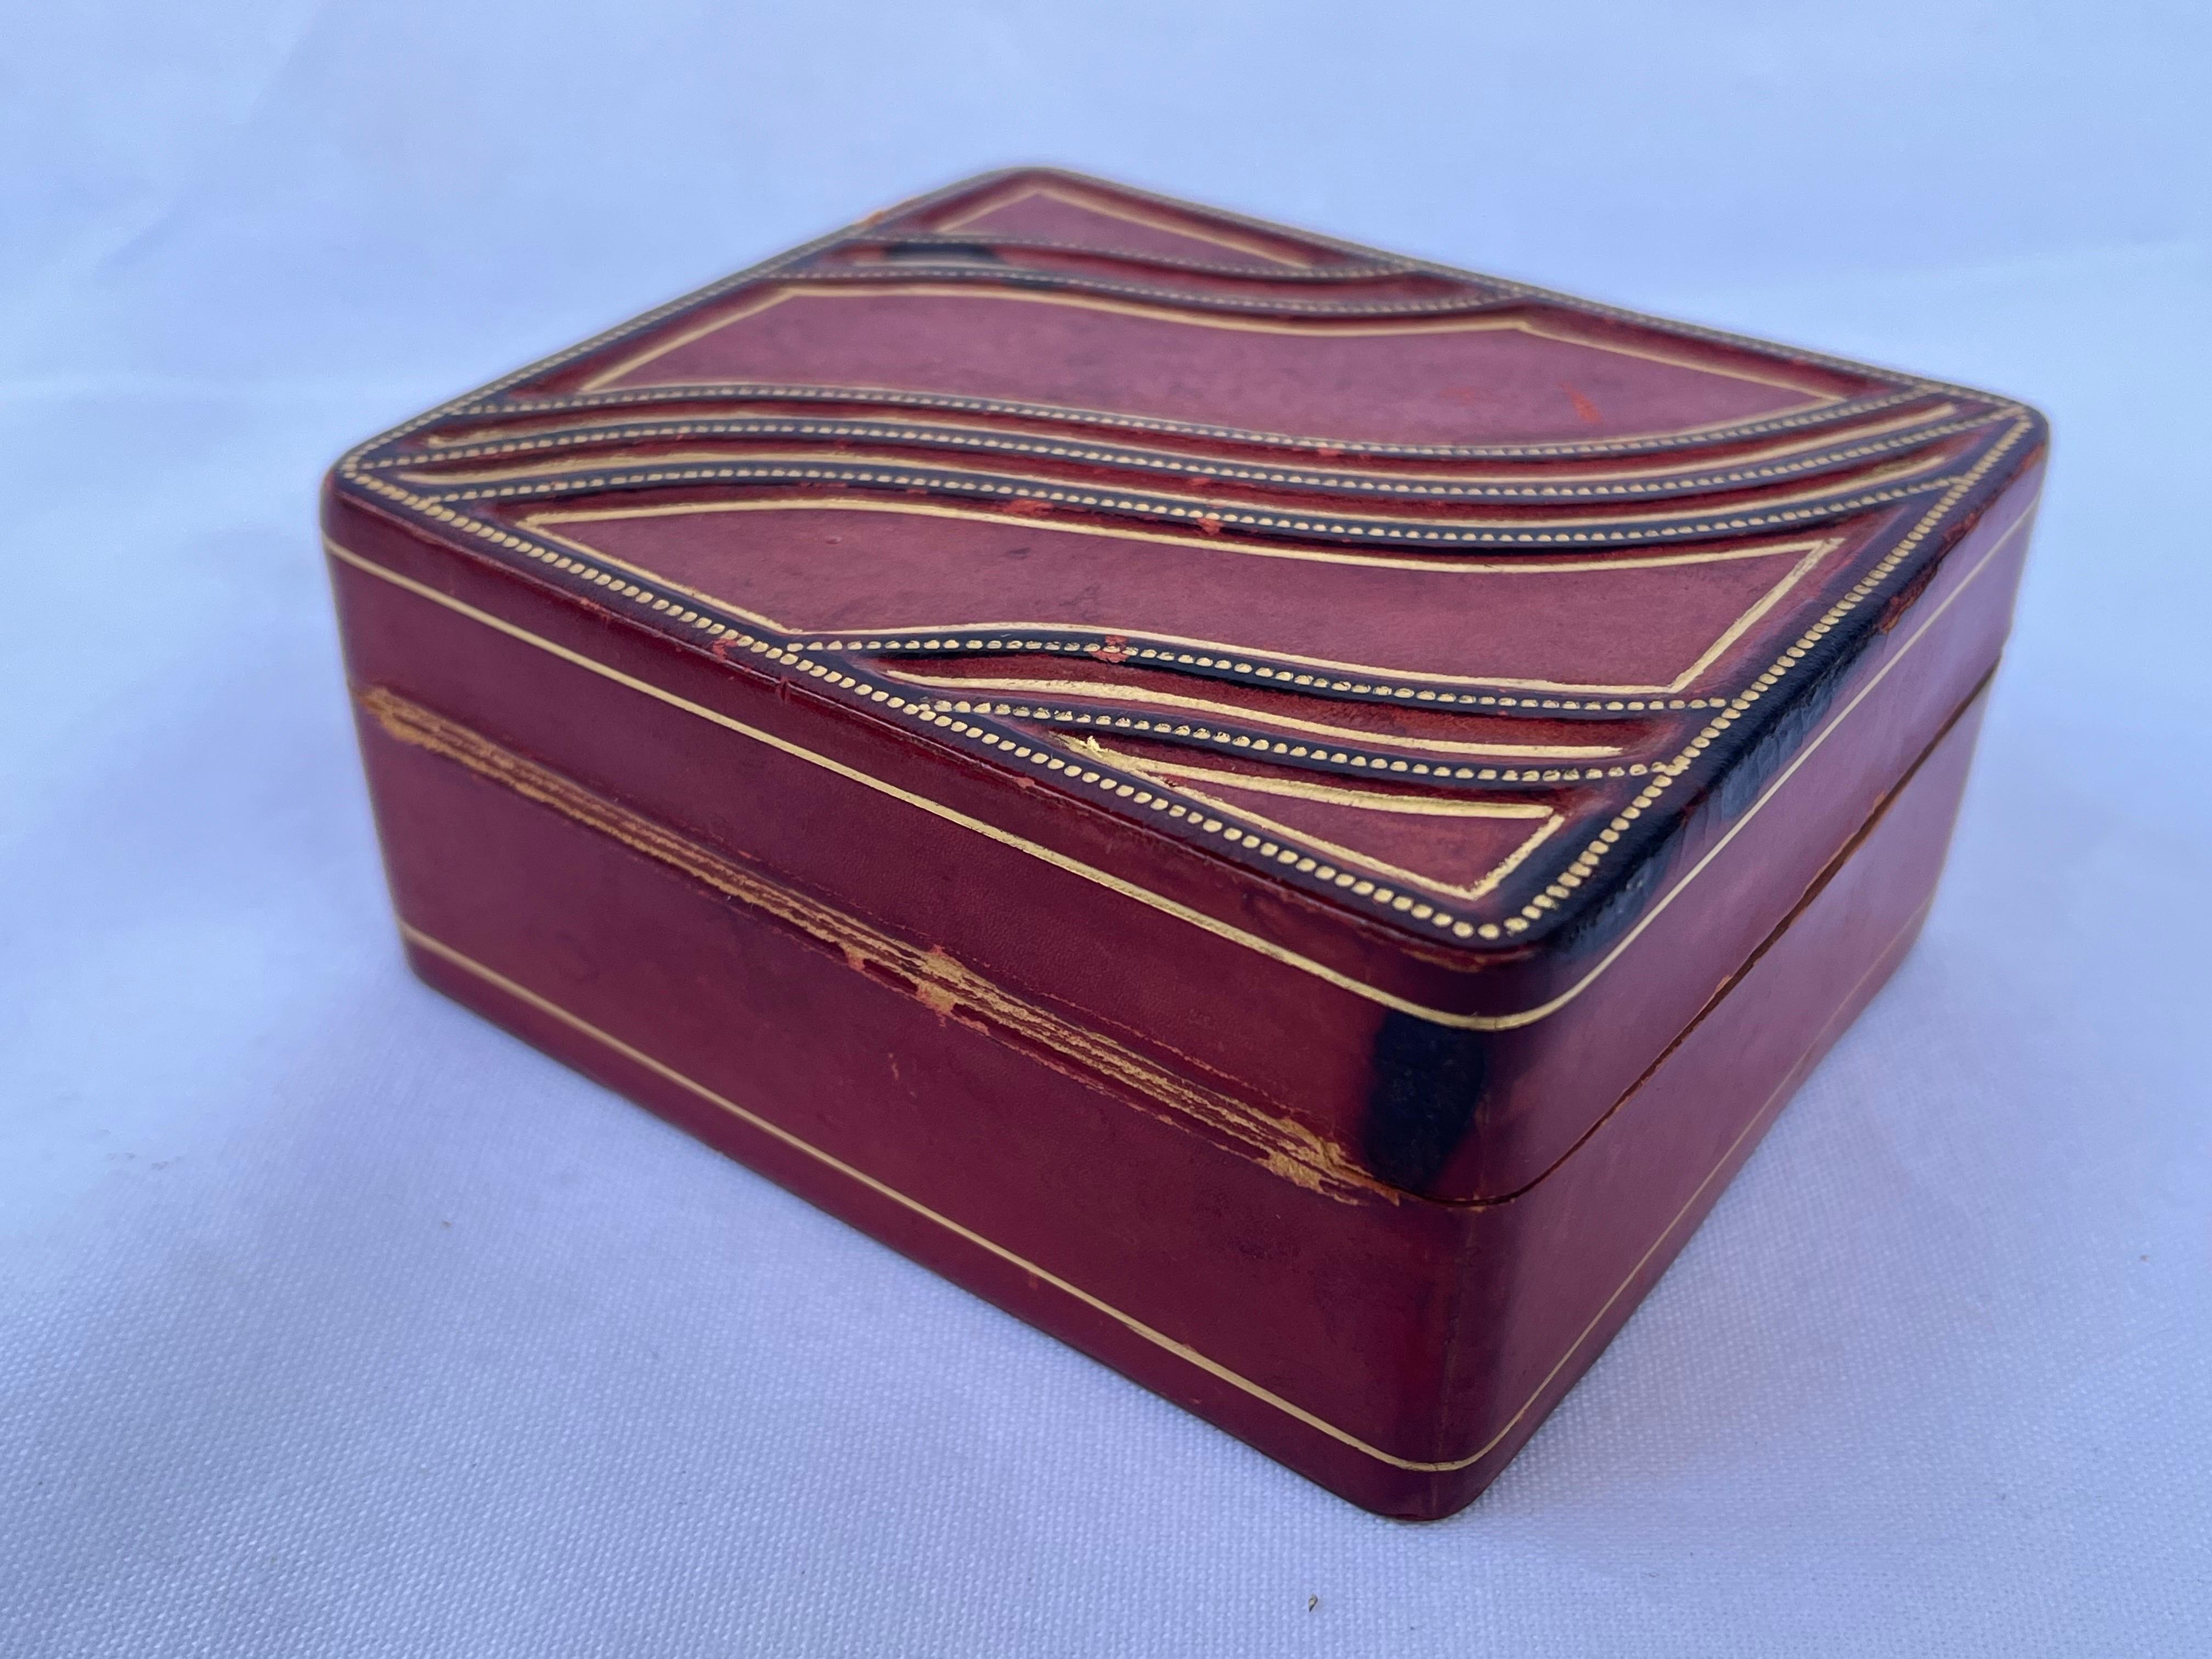 20th Century Italian Leather and Gold Gilt Embossed Trinket Box Desk Accessory from Firenze 